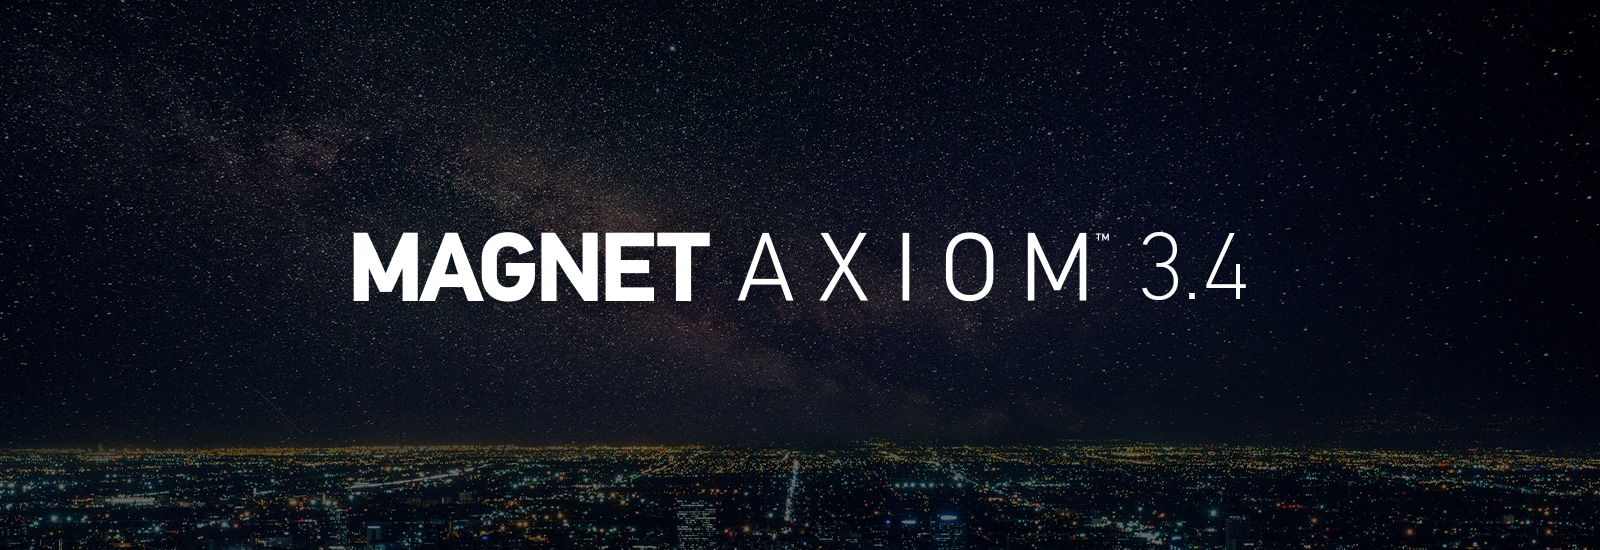 Magnet AXIOM 3.4 to Get New Mac Updates and Officer Wellness Features - Forensics